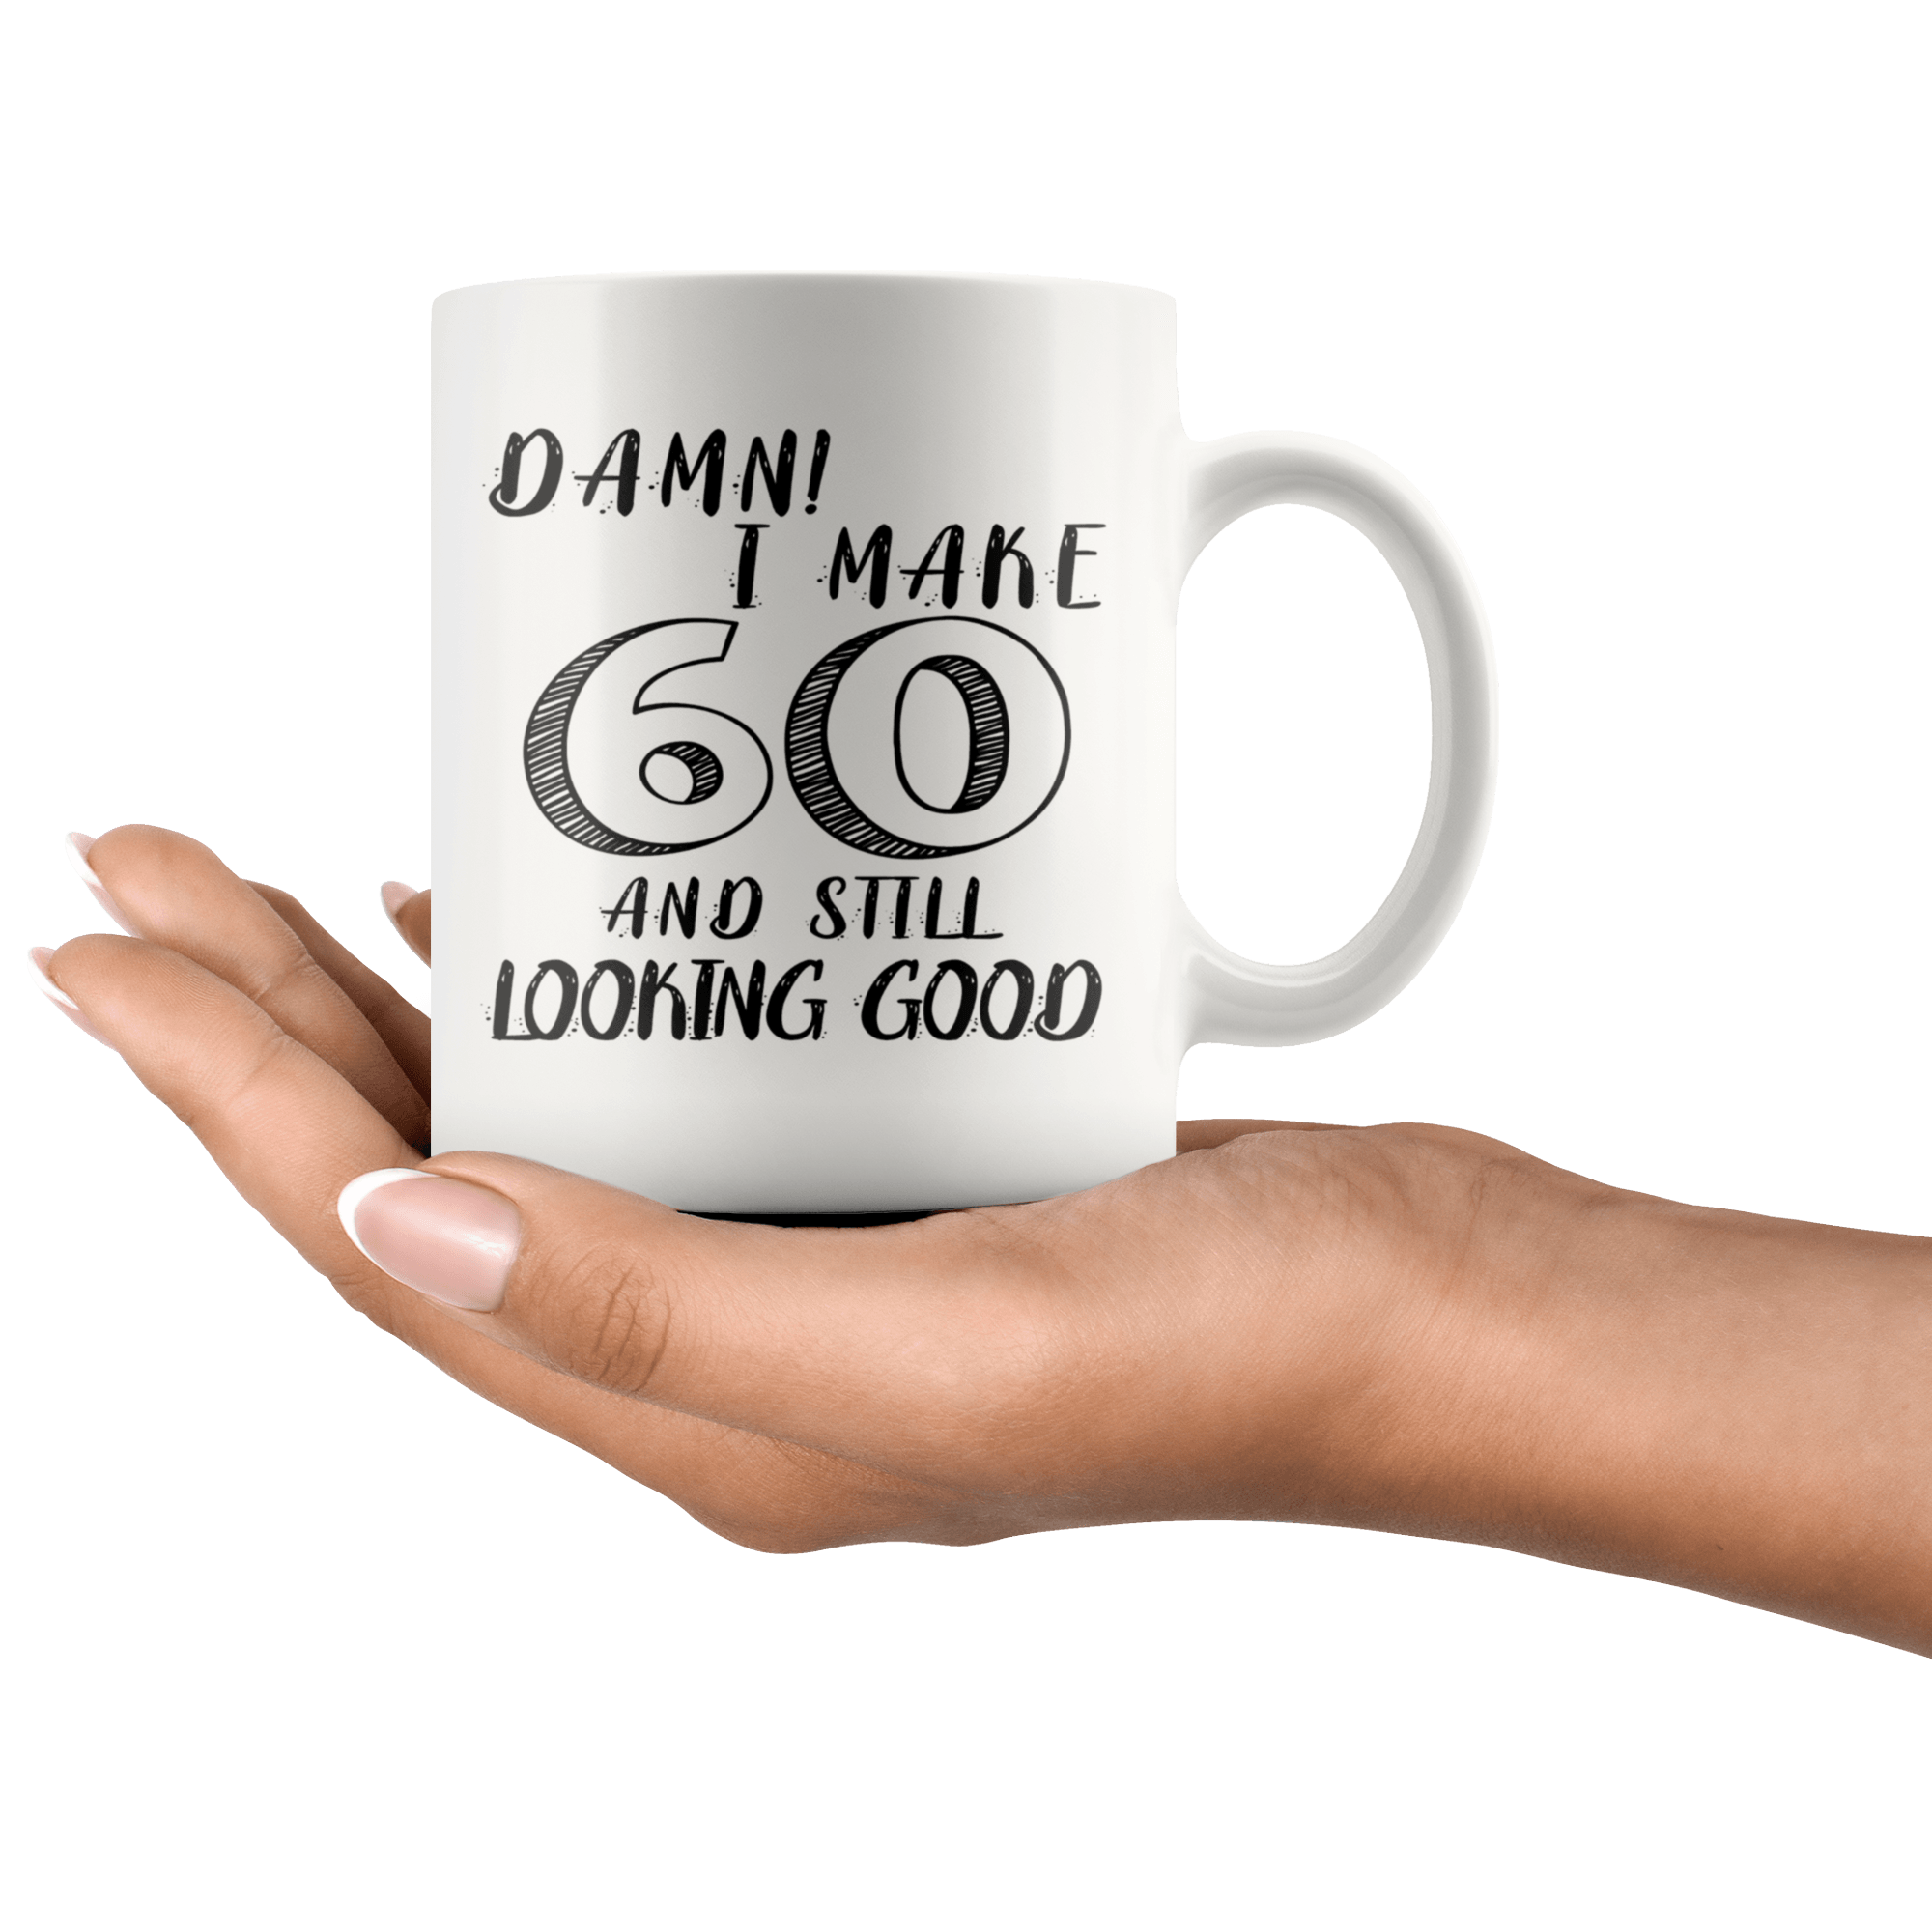 Damn! I Make 60 And Still Looking Good - 60th Birthday Coffee Mug For Man & Woman - Great Gift For Friends, Relatives, Colleagues or Family Members Celebrating 60 Years Old Birthday - SPCM